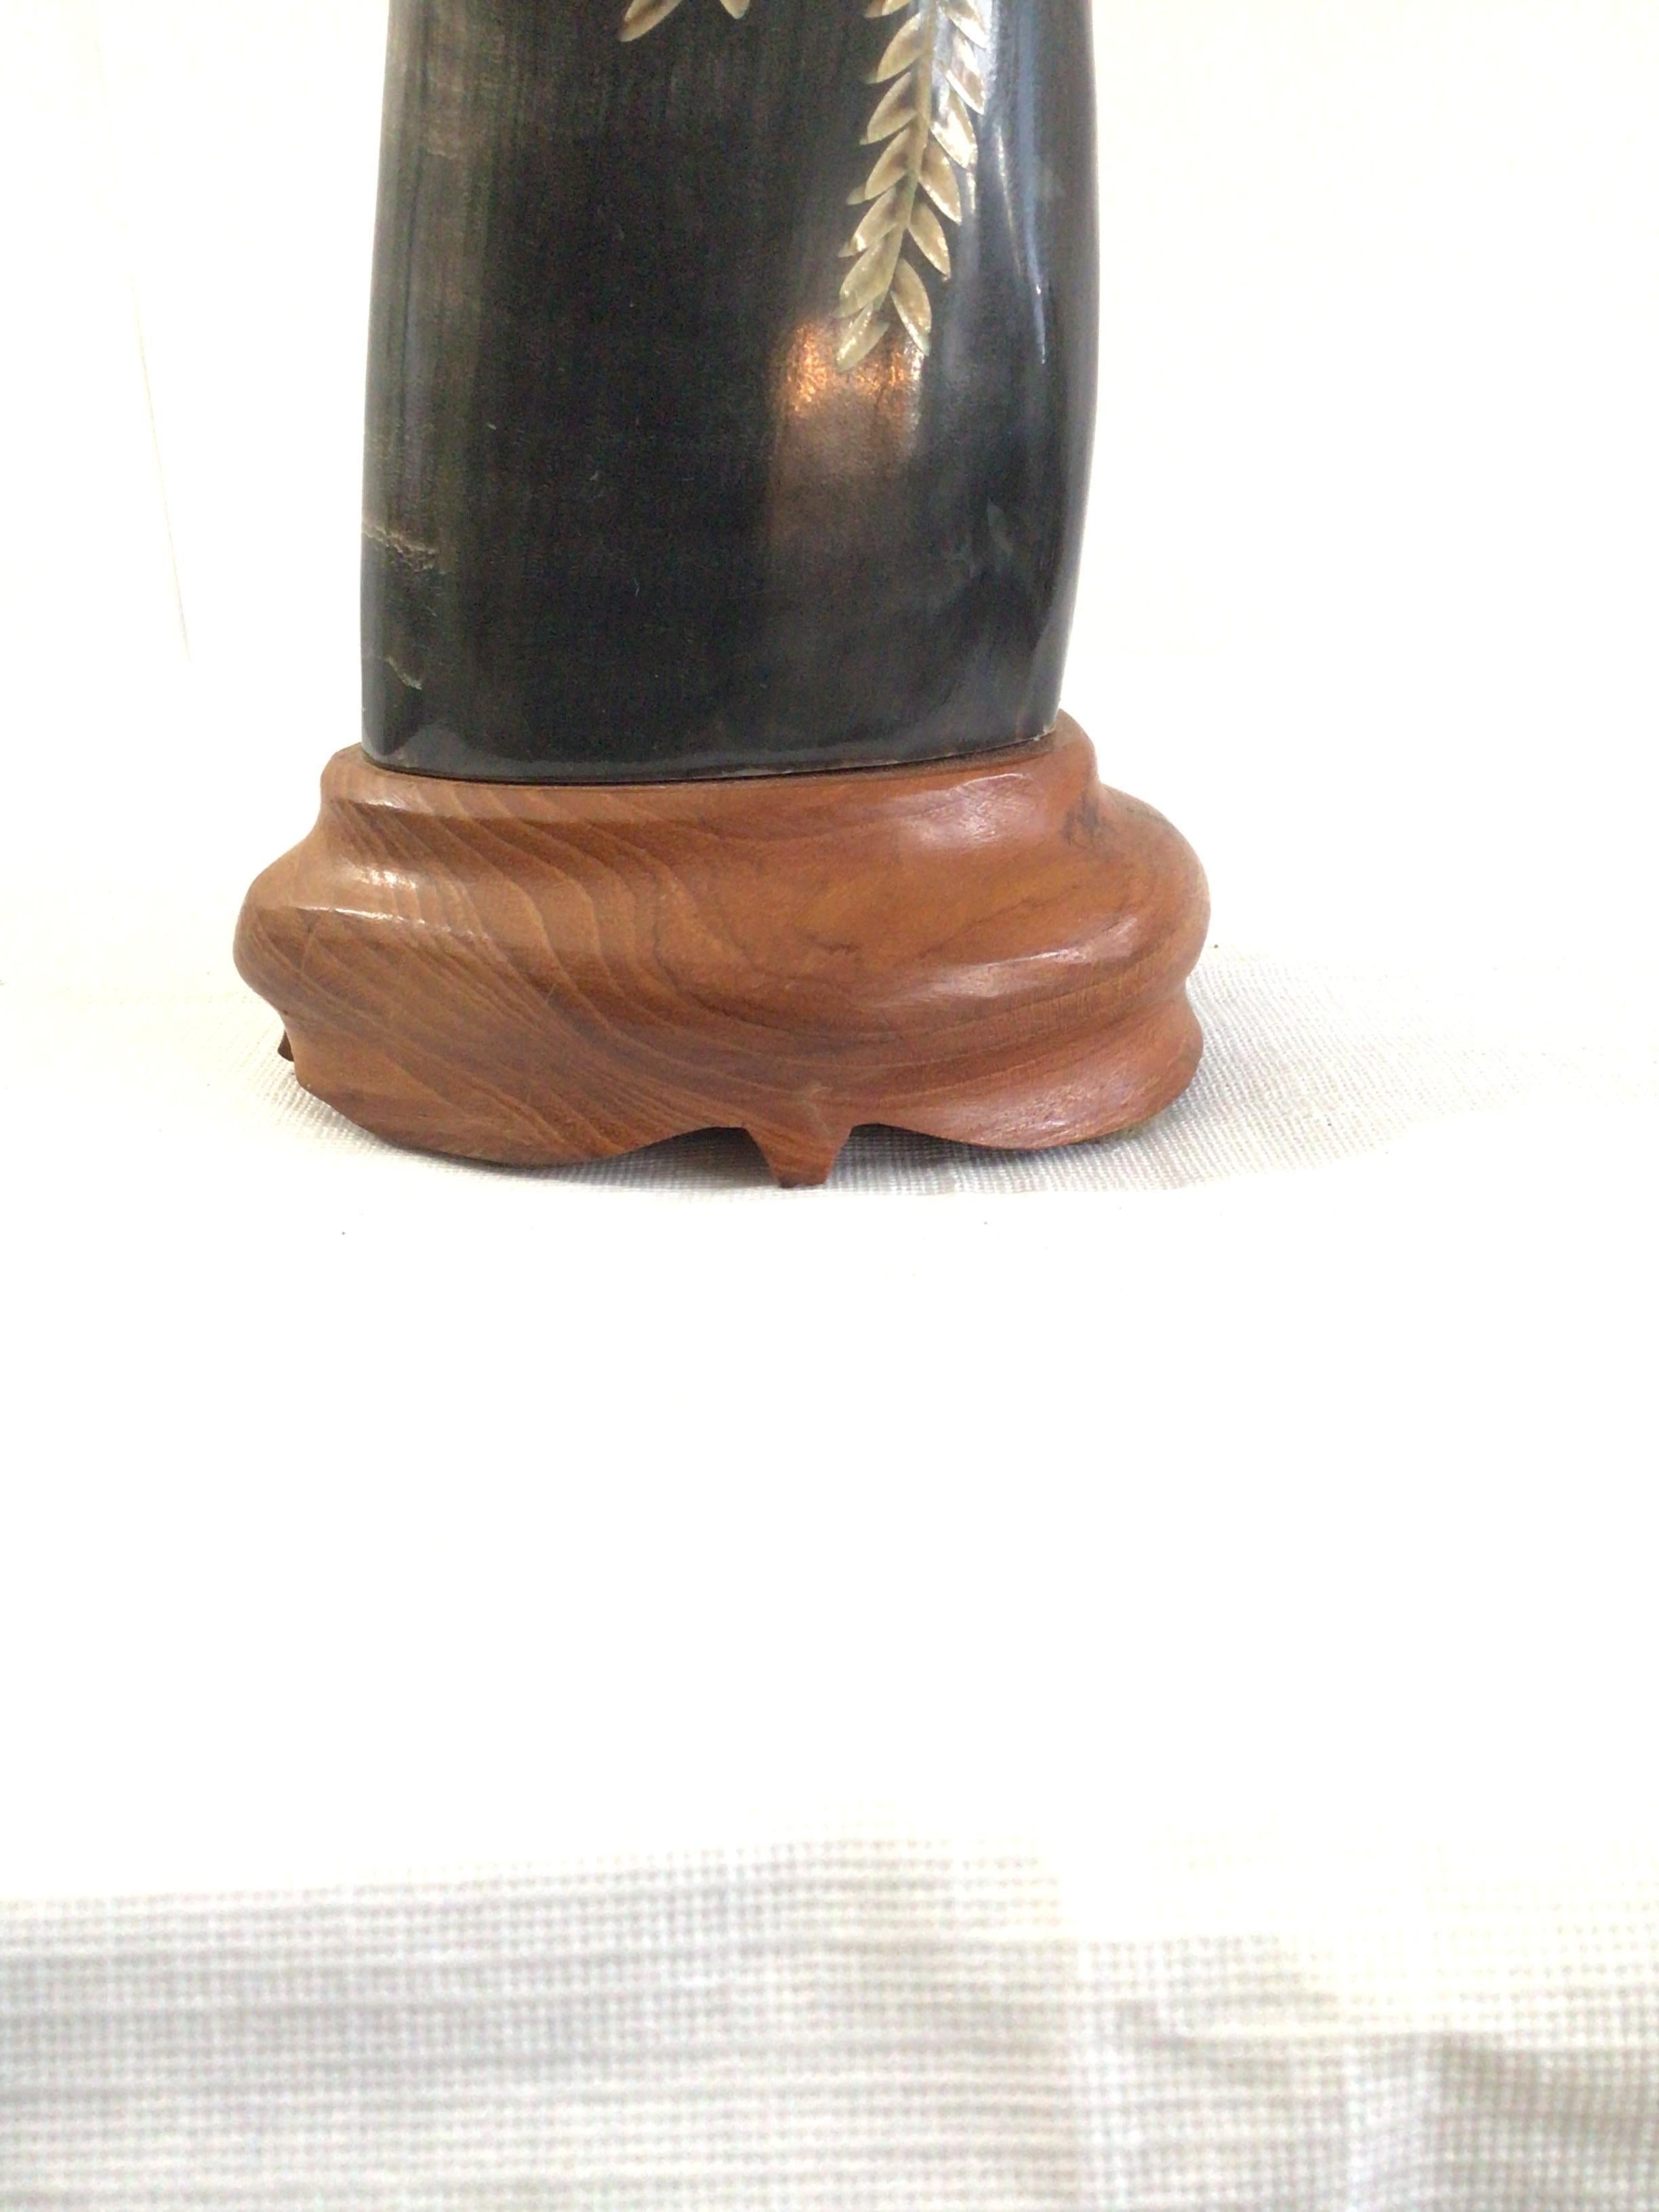 1940s Han Carved Water Buffalo Horn of Detailed Bird Sculpture on a Wood Base For Sale 1